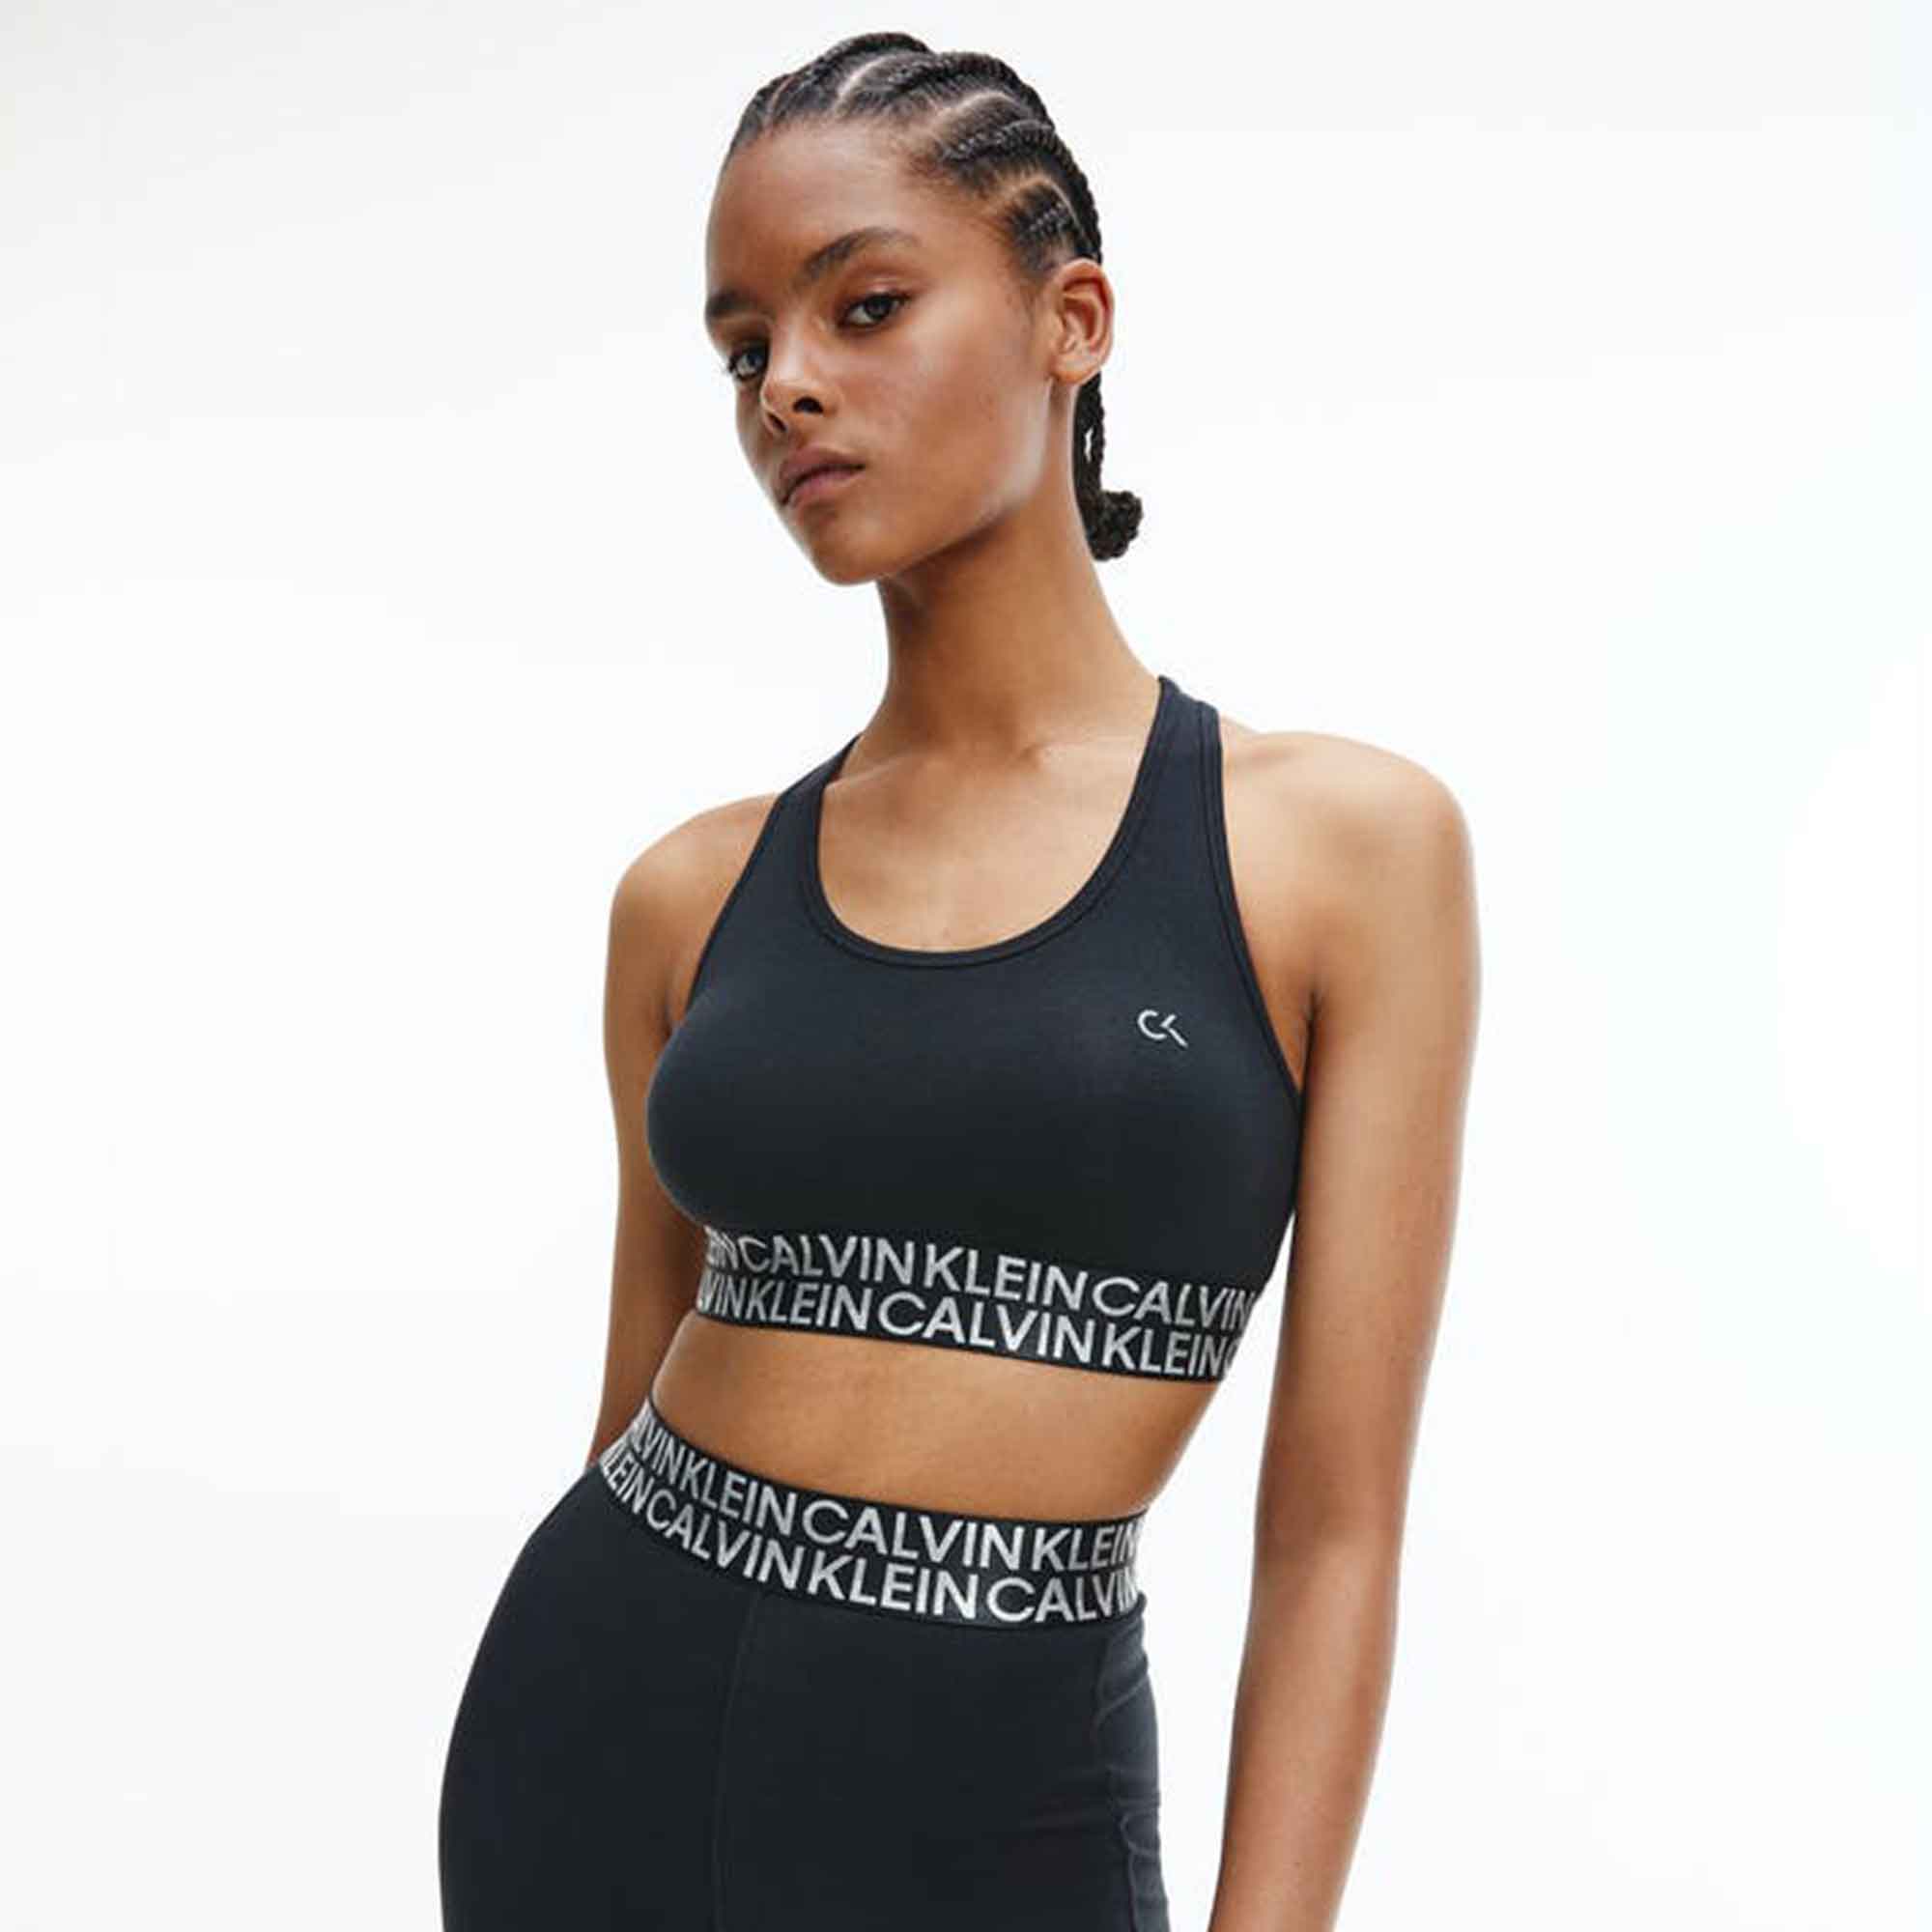 Calvin Klein's New Performance Pieces Are Built For Your Busy Life